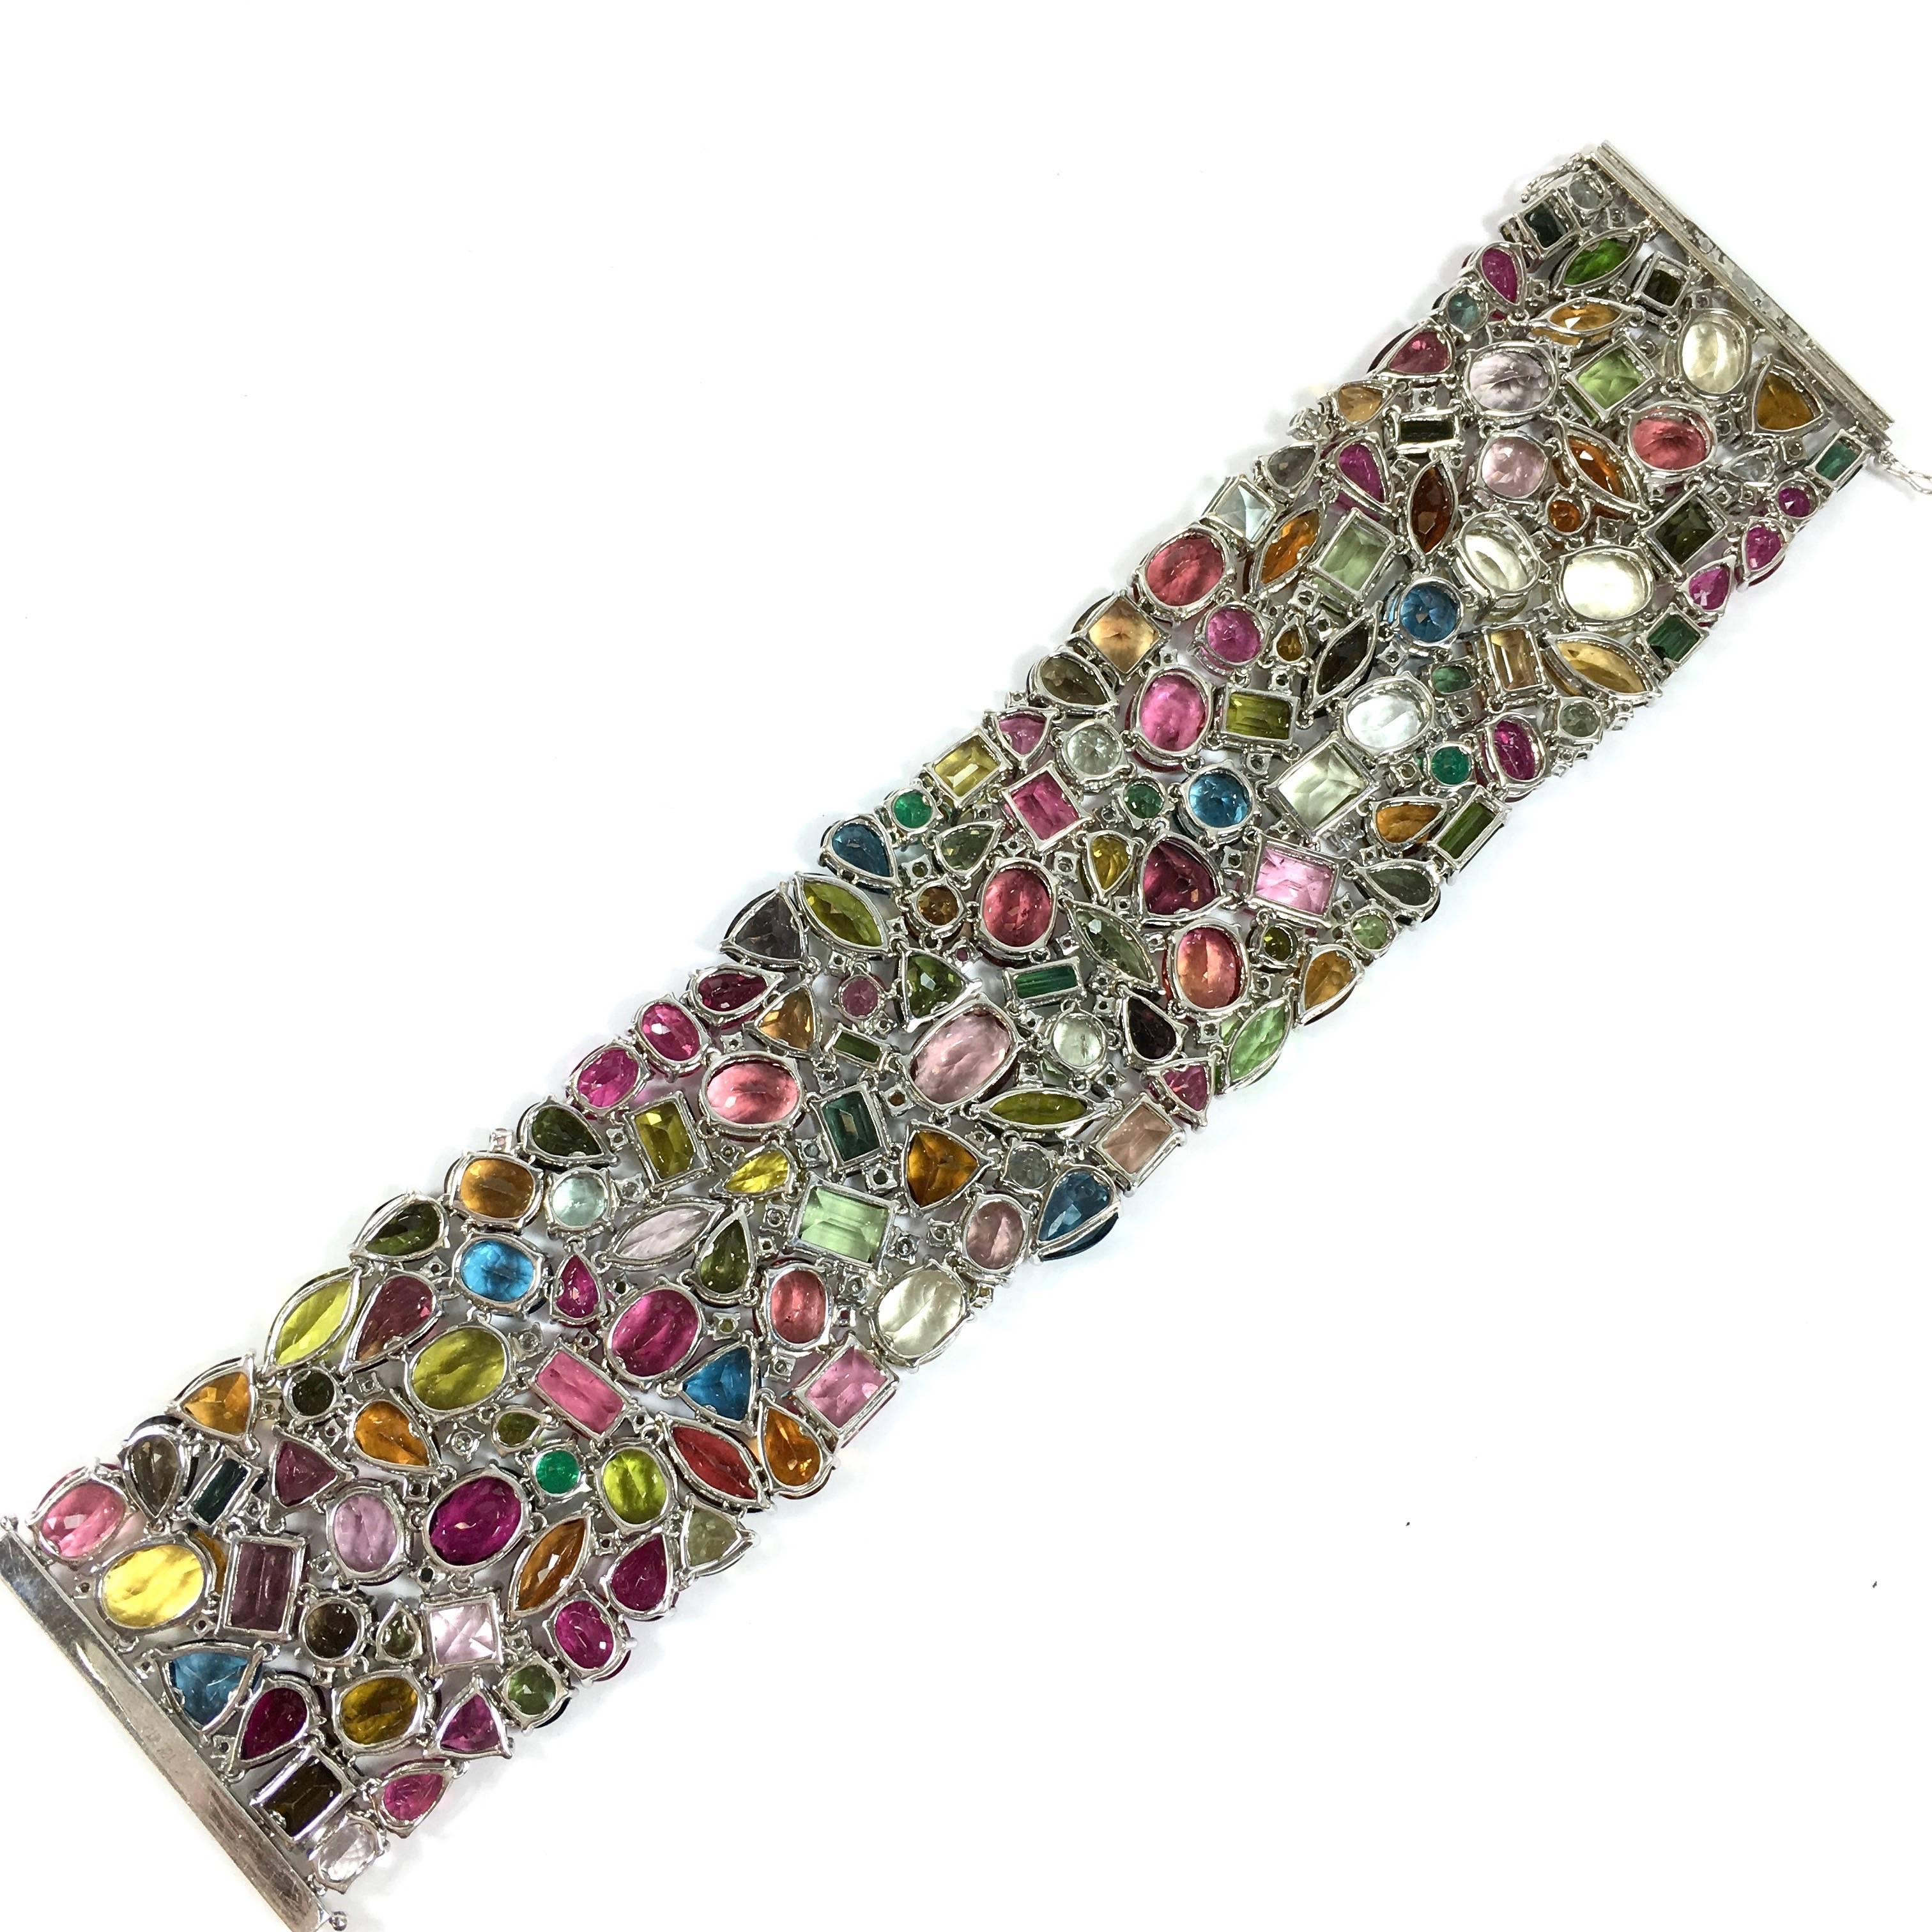  Multi Gemstone Diamond Gold Wide Bracelet In New Condition For Sale In Agoura Hills, CA